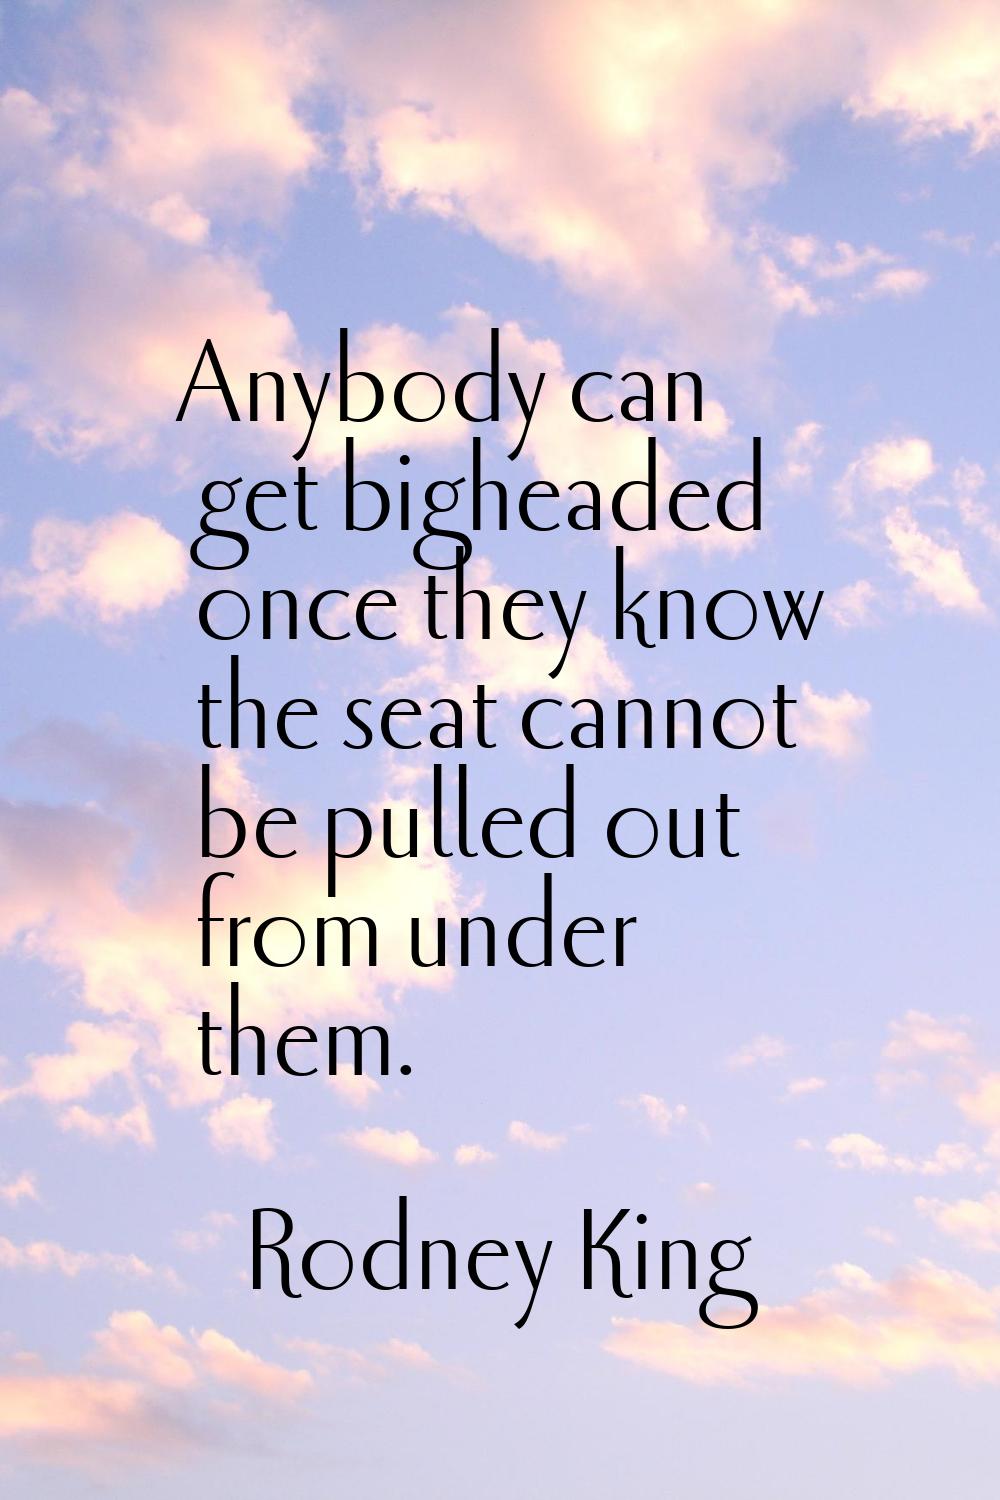 Anybody can get bigheaded once they know the seat cannot be pulled out from under them.